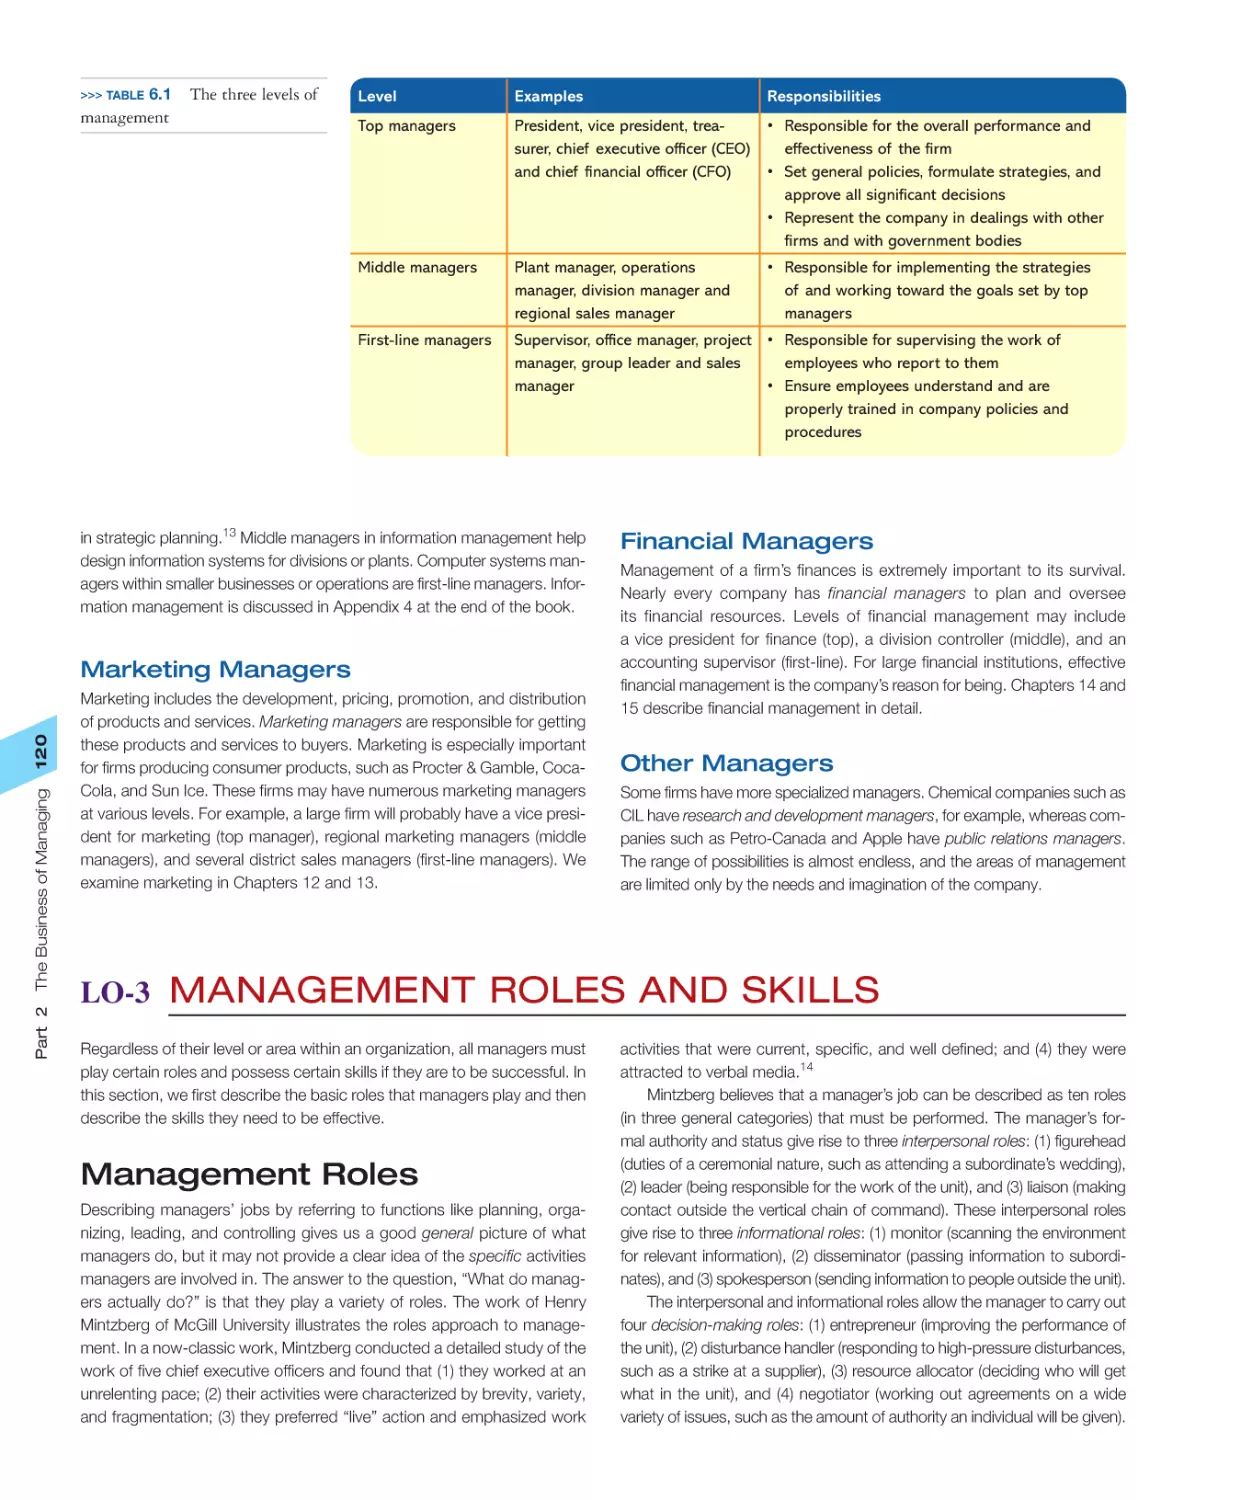 LO‐3 Management Roles and Skills